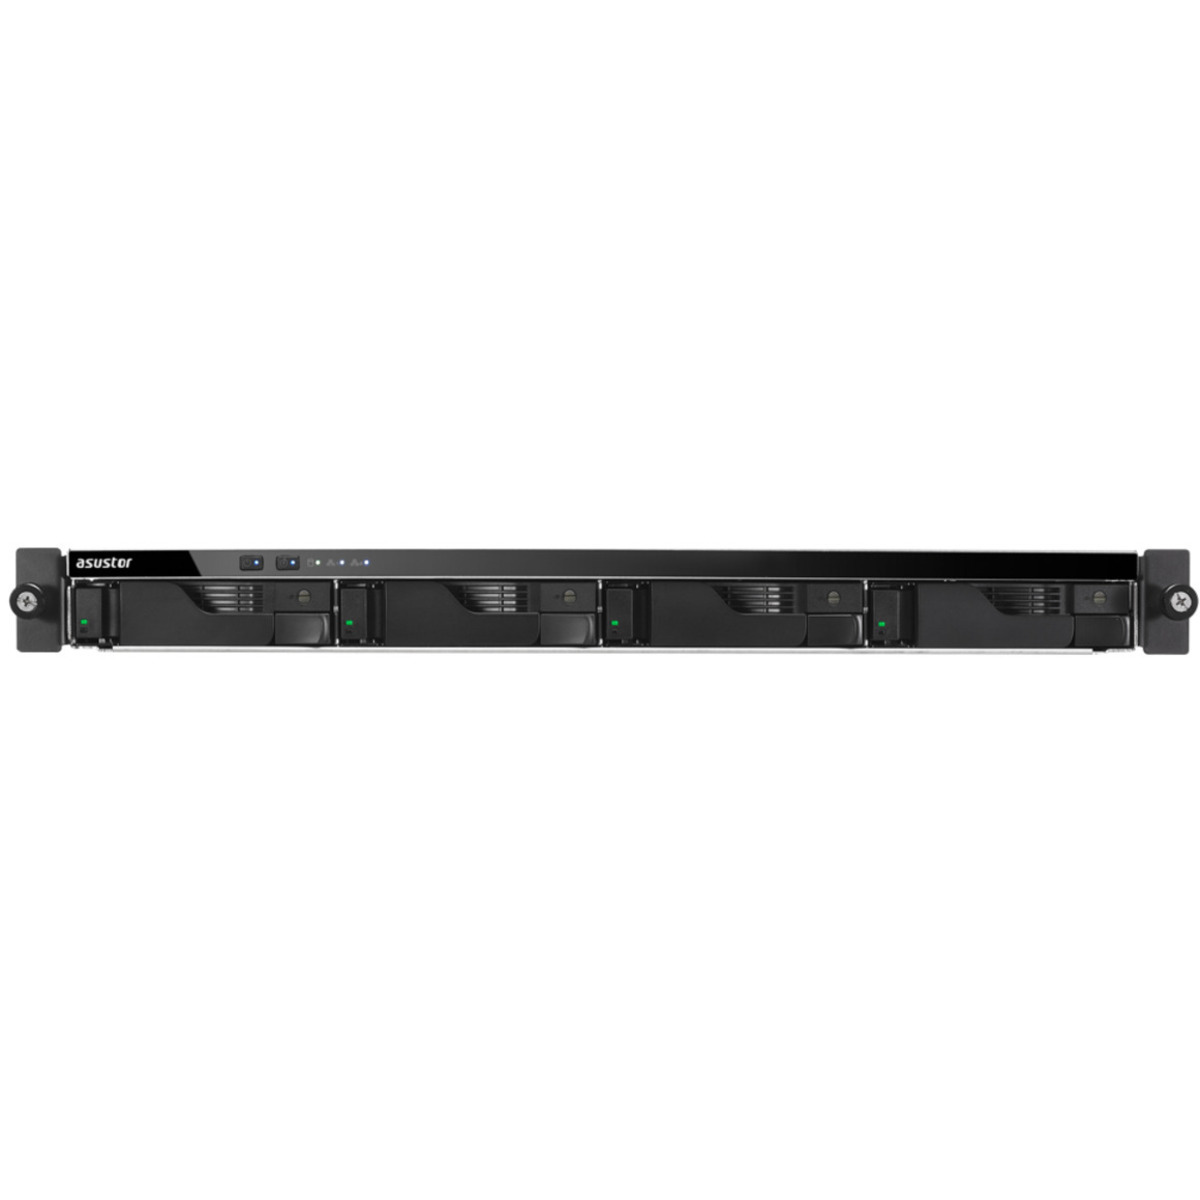 ASUSTOR LOCKERSTOR 4RS AS6504RS 4tb 4-Bay RackMount Multimedia / Power User / Business NAS - Network Attached Storage Device 2x2tb Western Digital Gold WD2005FBYZ 3.5 7200rpm SATA 6Gb/s HDD ENTERPRISE Class Drives Installed - Burn-In Tested - FREE RAM UPGRADE LOCKERSTOR 4RS AS6504RS